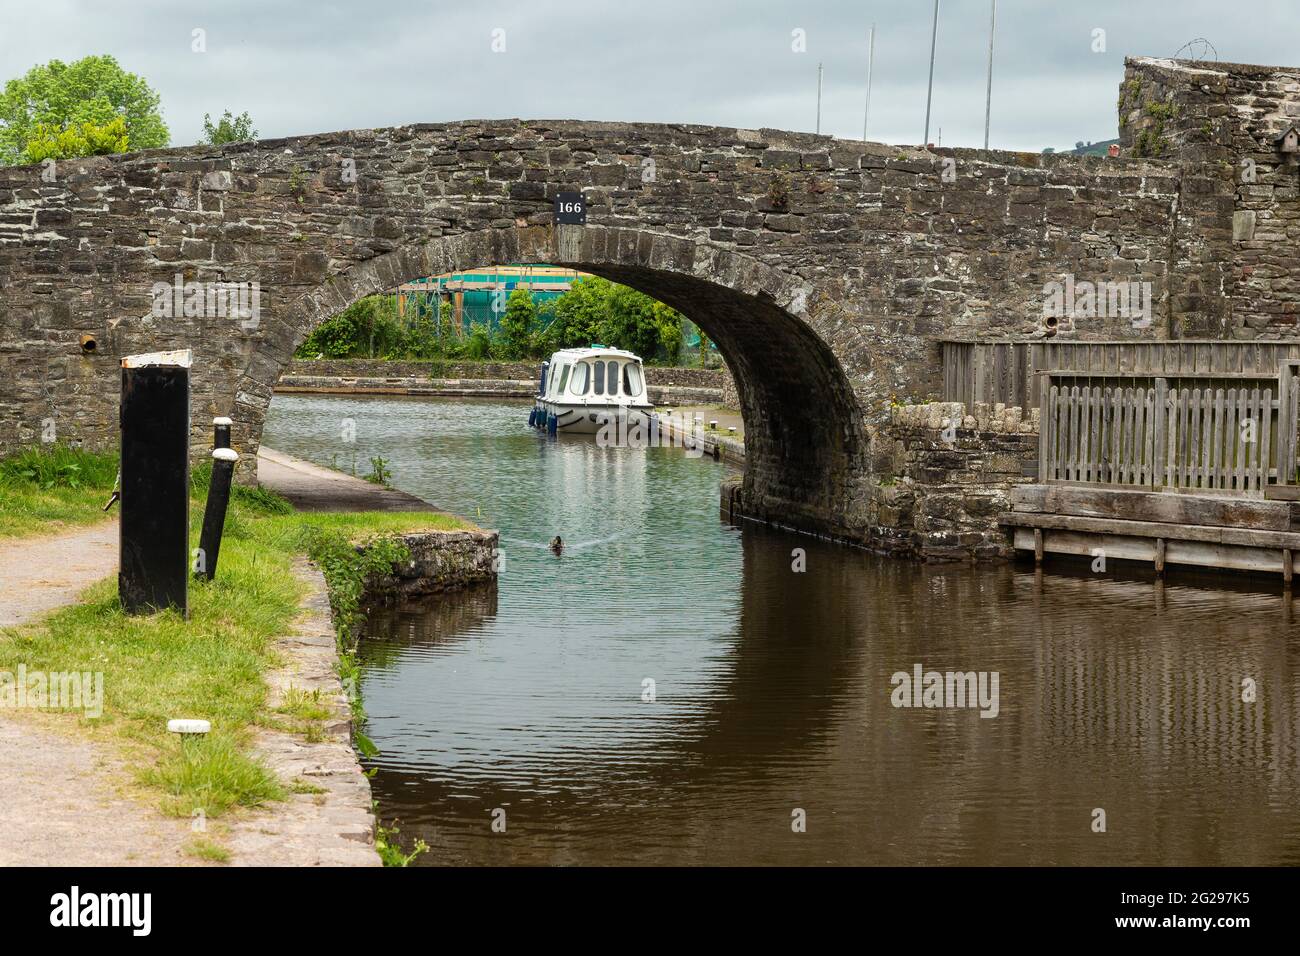 Bridge 166 on the Monmouthshire and Brecon Canal, near Brecon, Powys, Wales, UK Stock Photo